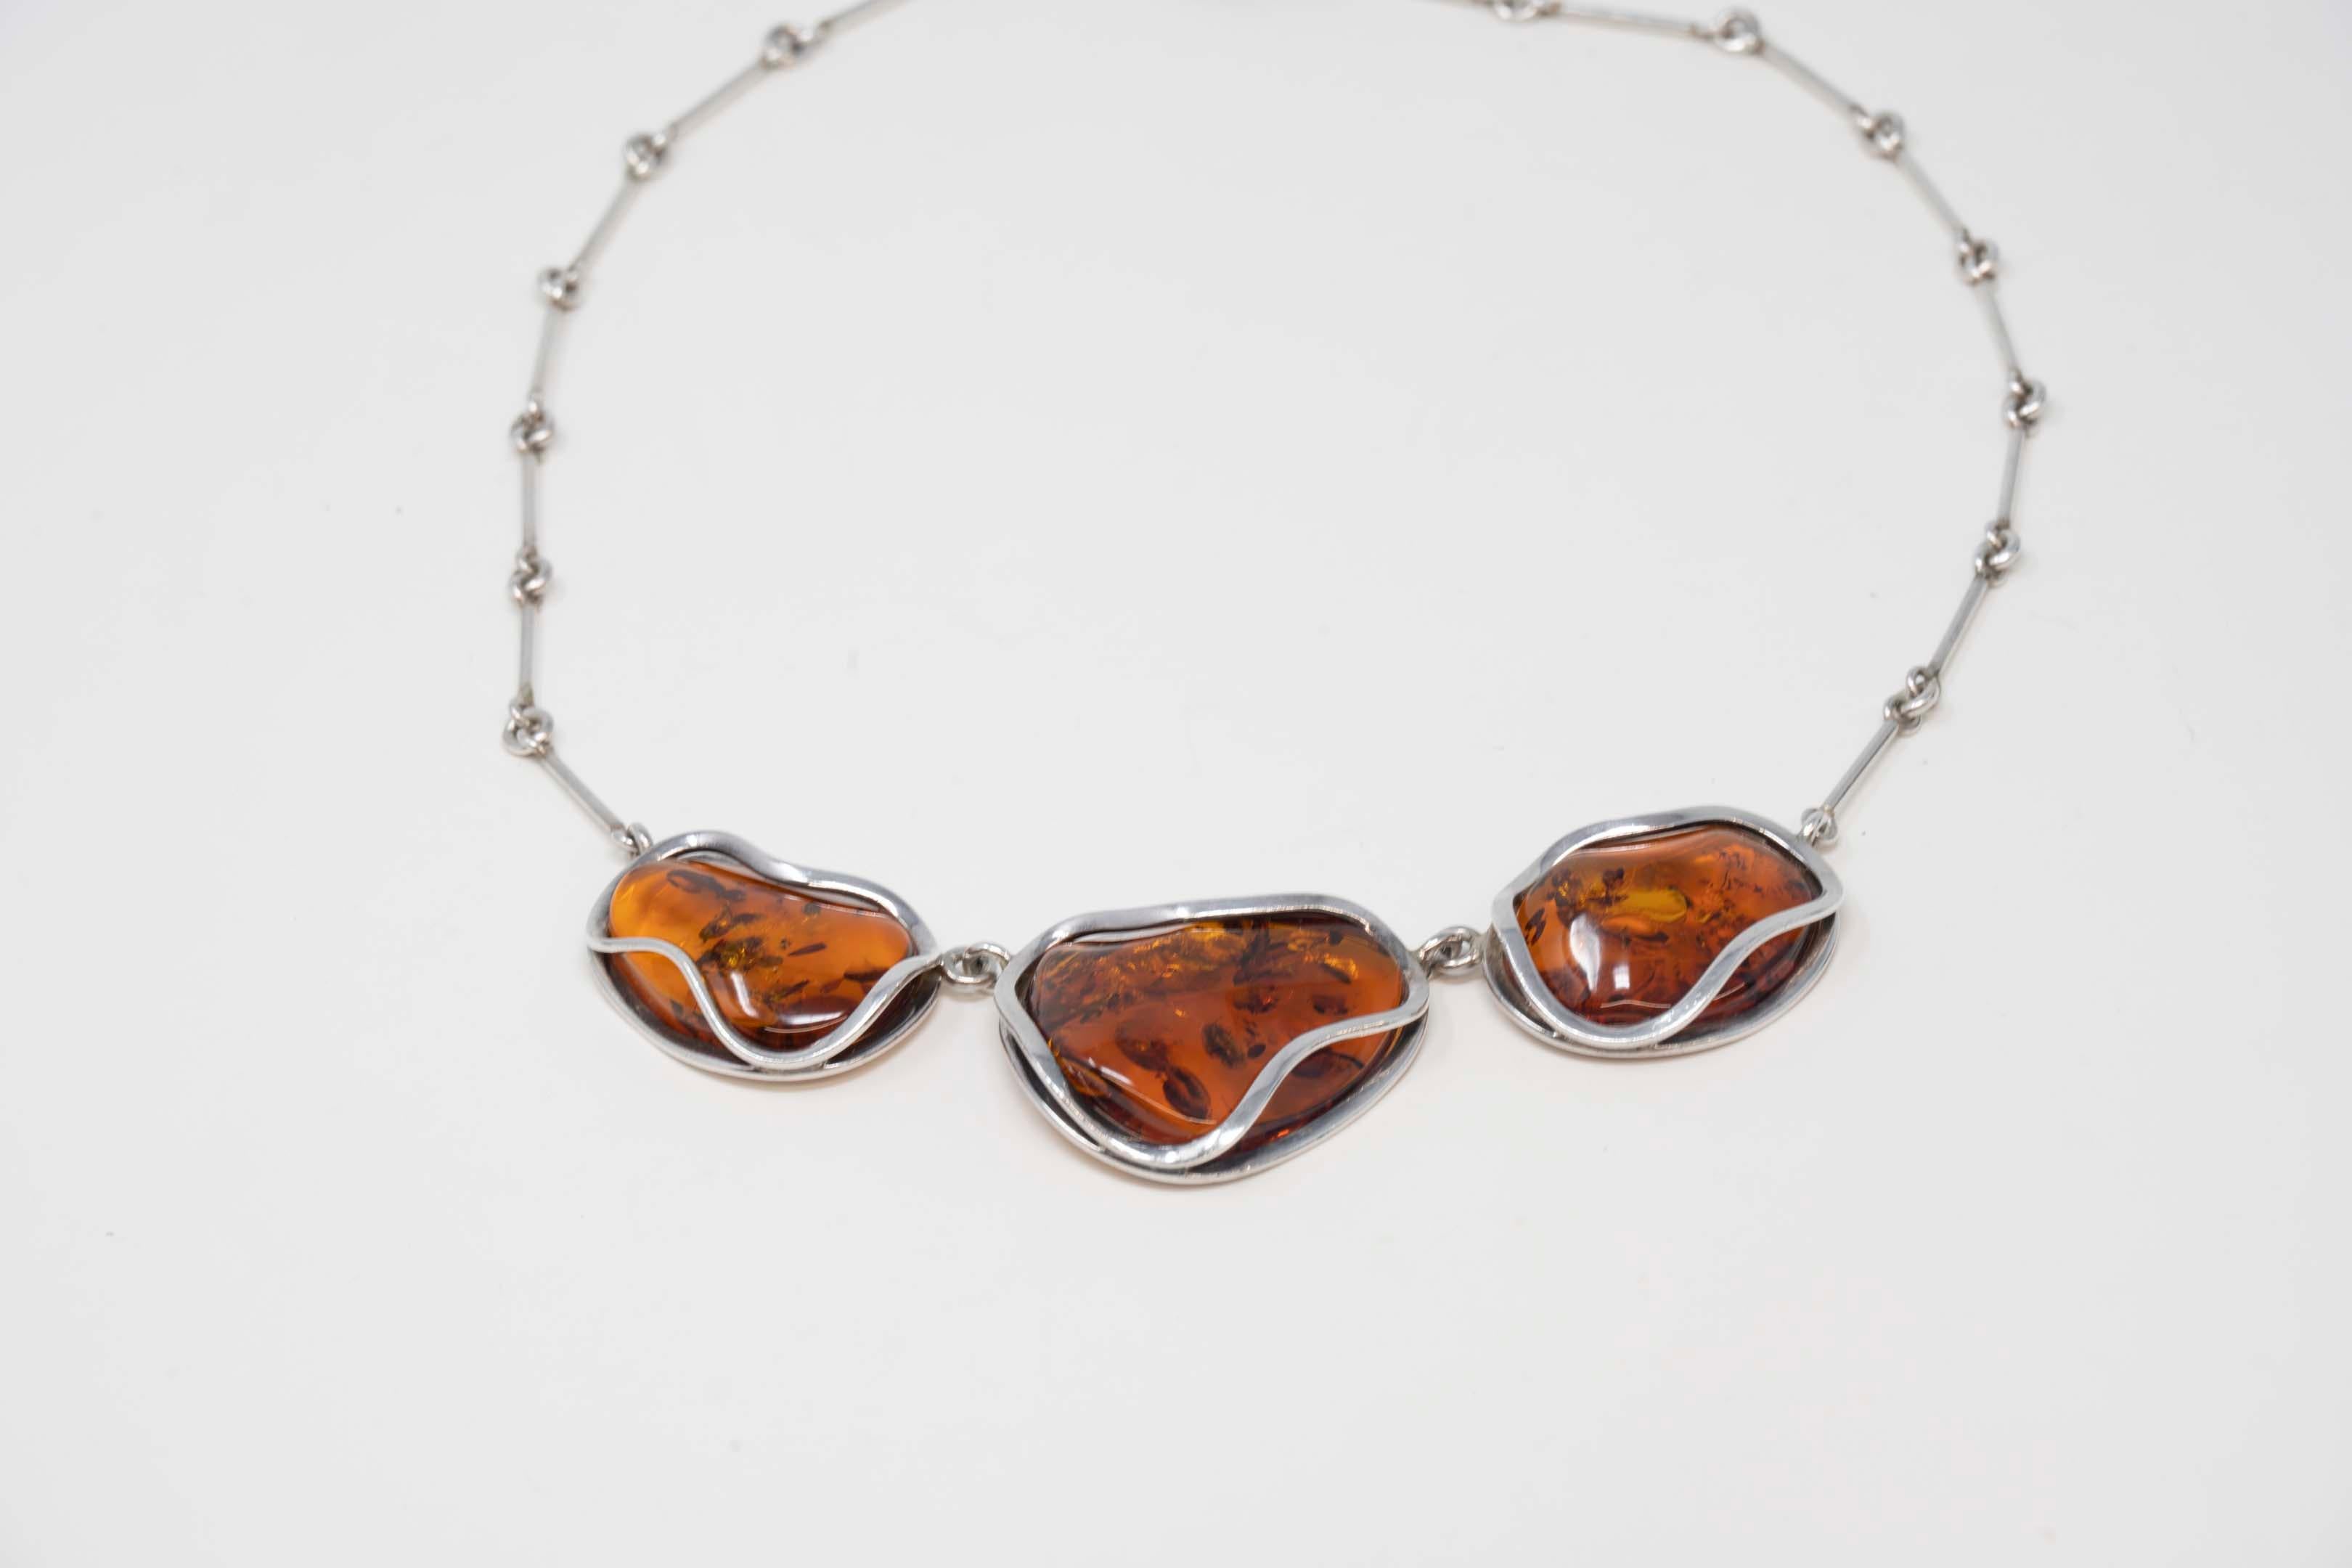 Uncut Baltic Amber Necklace 925 Silver